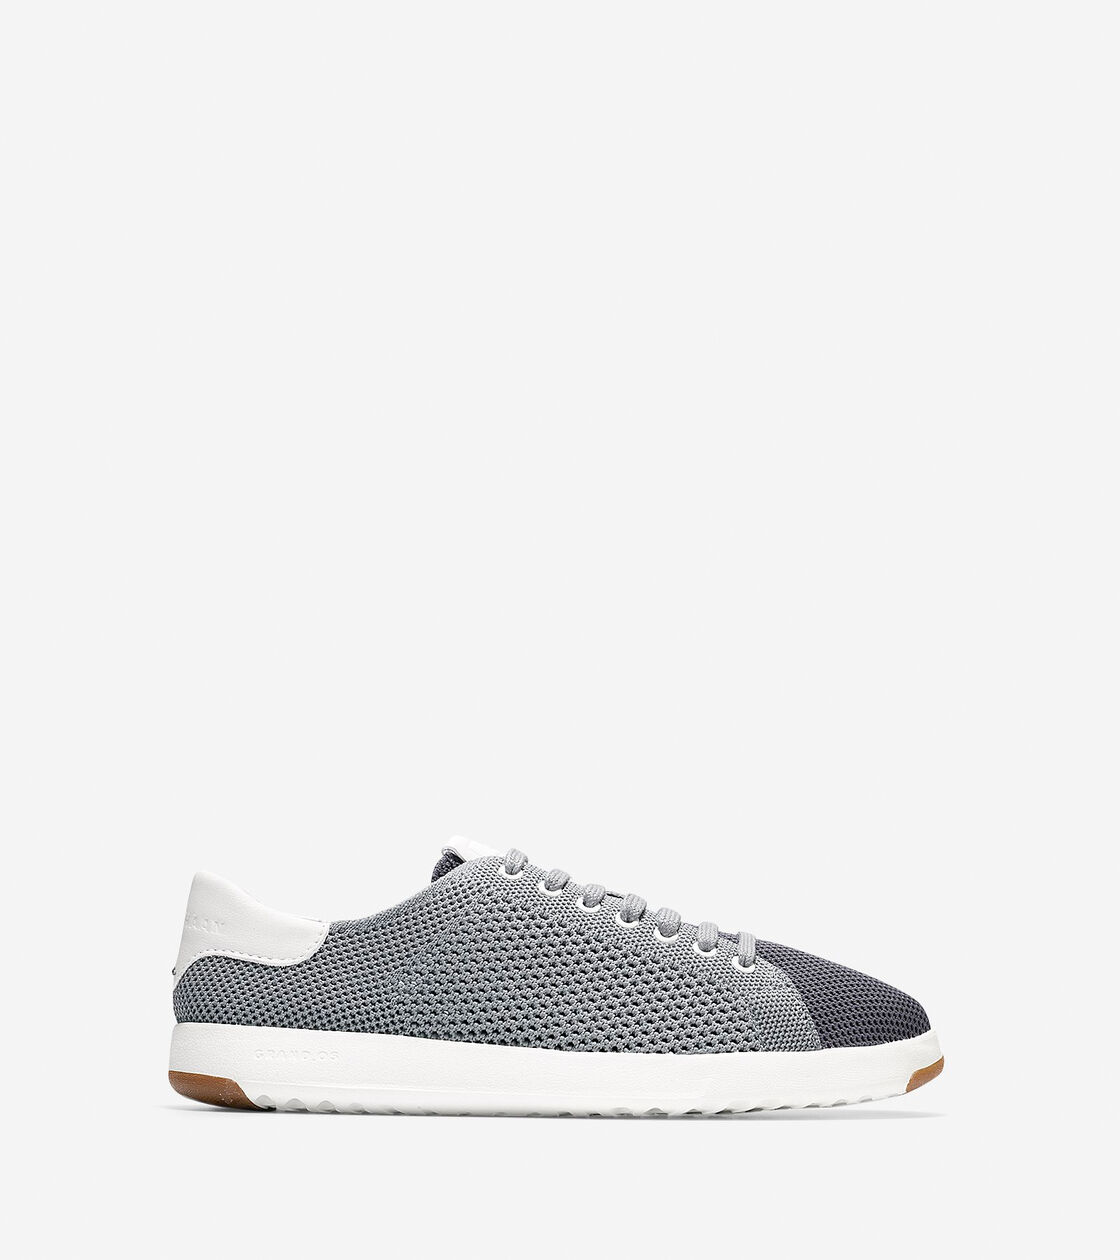 GrandPro Stitchlite Tennis Sneakers in Magnet Knit | Cole Haan